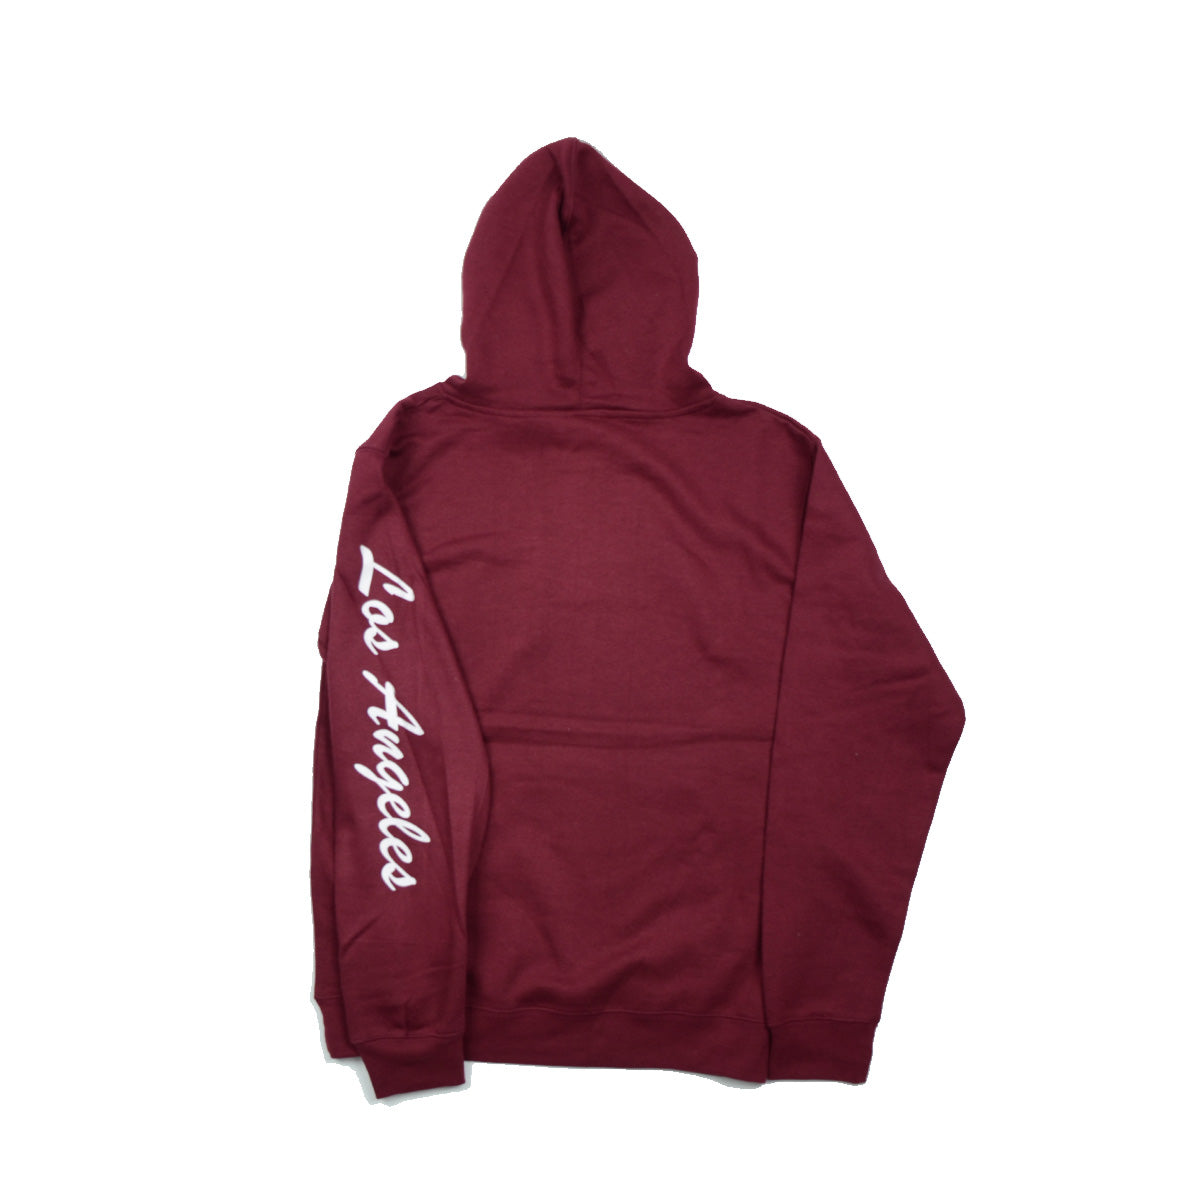 6 Pieces Pack of Burgundy Hoodie "GOAT" 1S-2M-2L-1XL